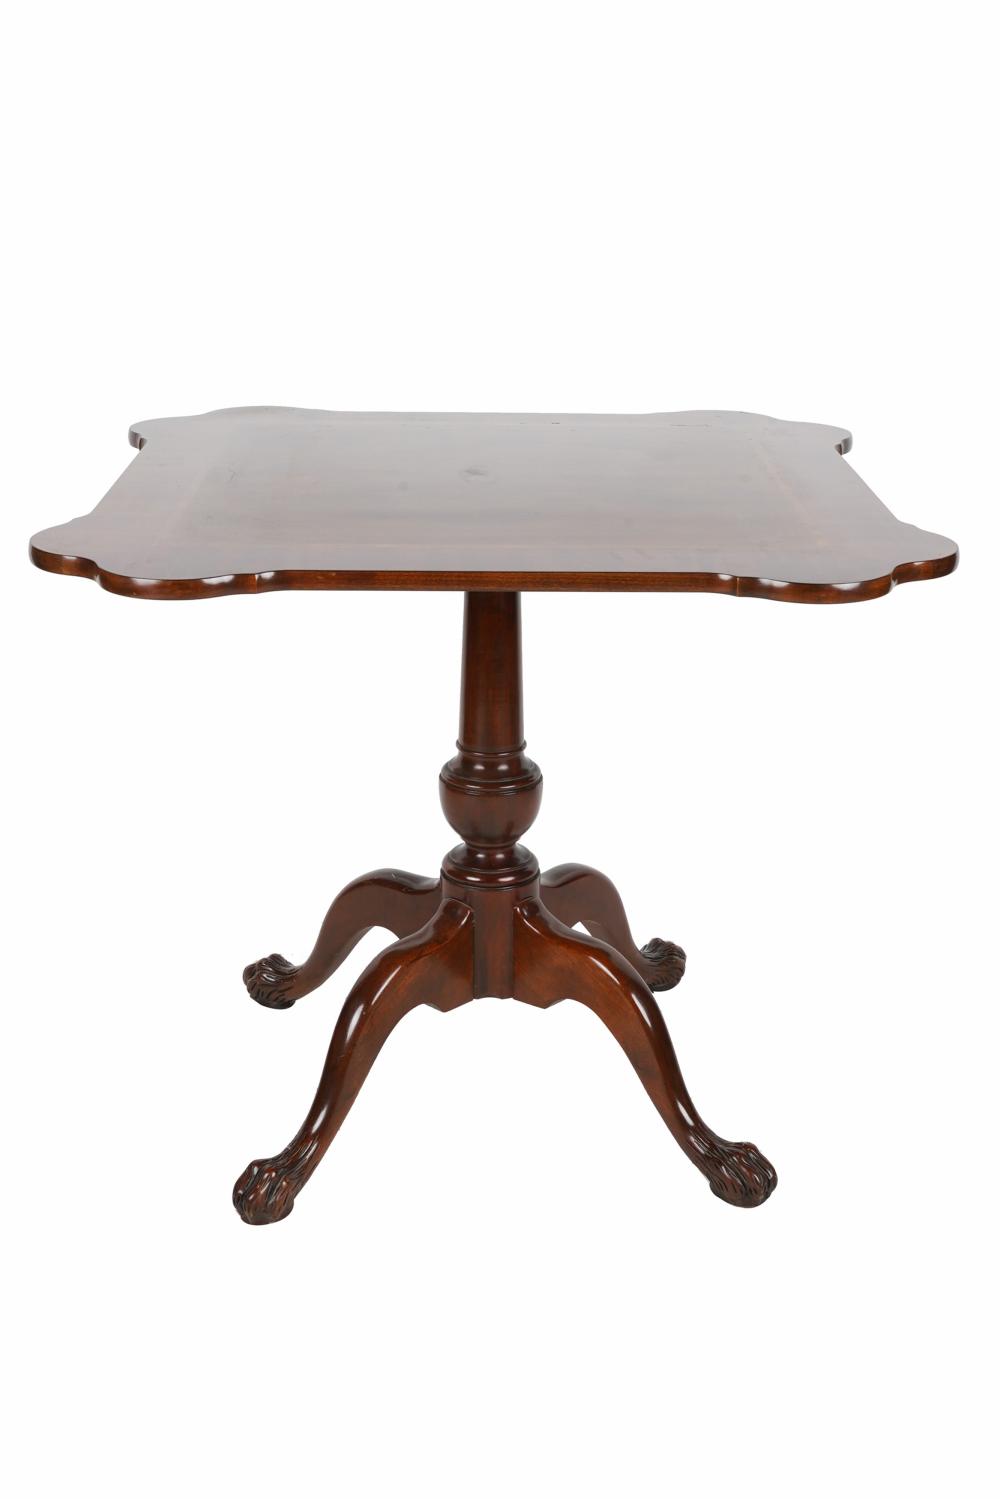 BAKER CHIPPENDALE STYLE MAHOGANY 33356a